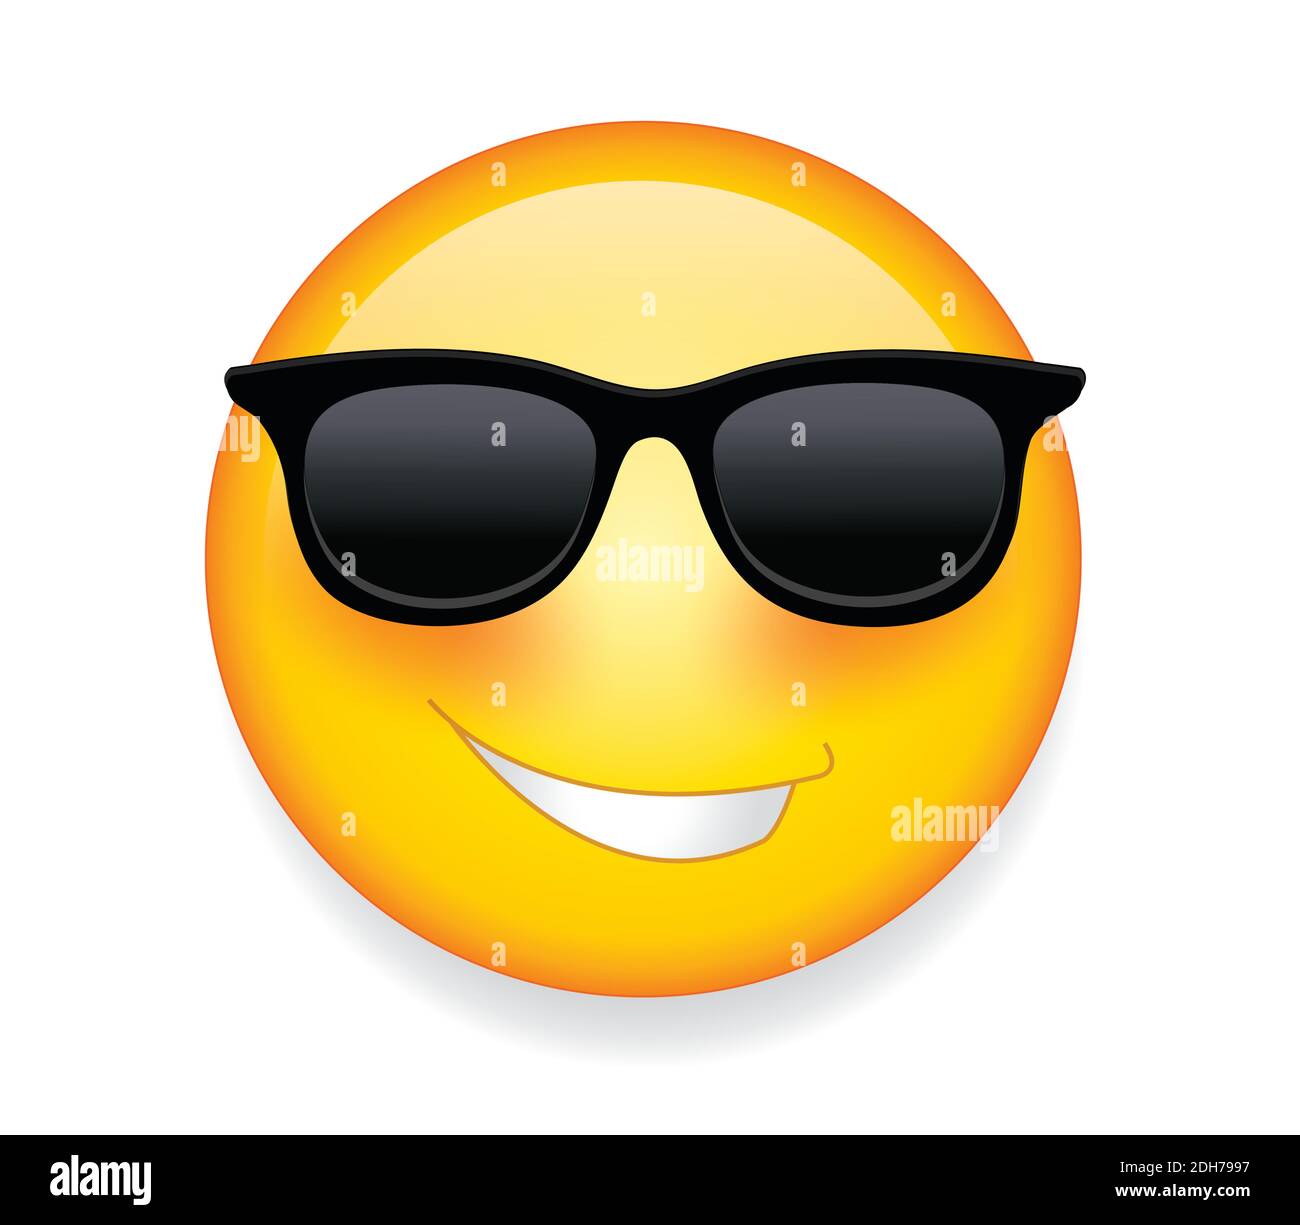 High quality emoticon with sunglasses. Emoji vector. Cool smiling Face with Sunglasses vector illustration. Yellow face with broad smile. Stock Vector